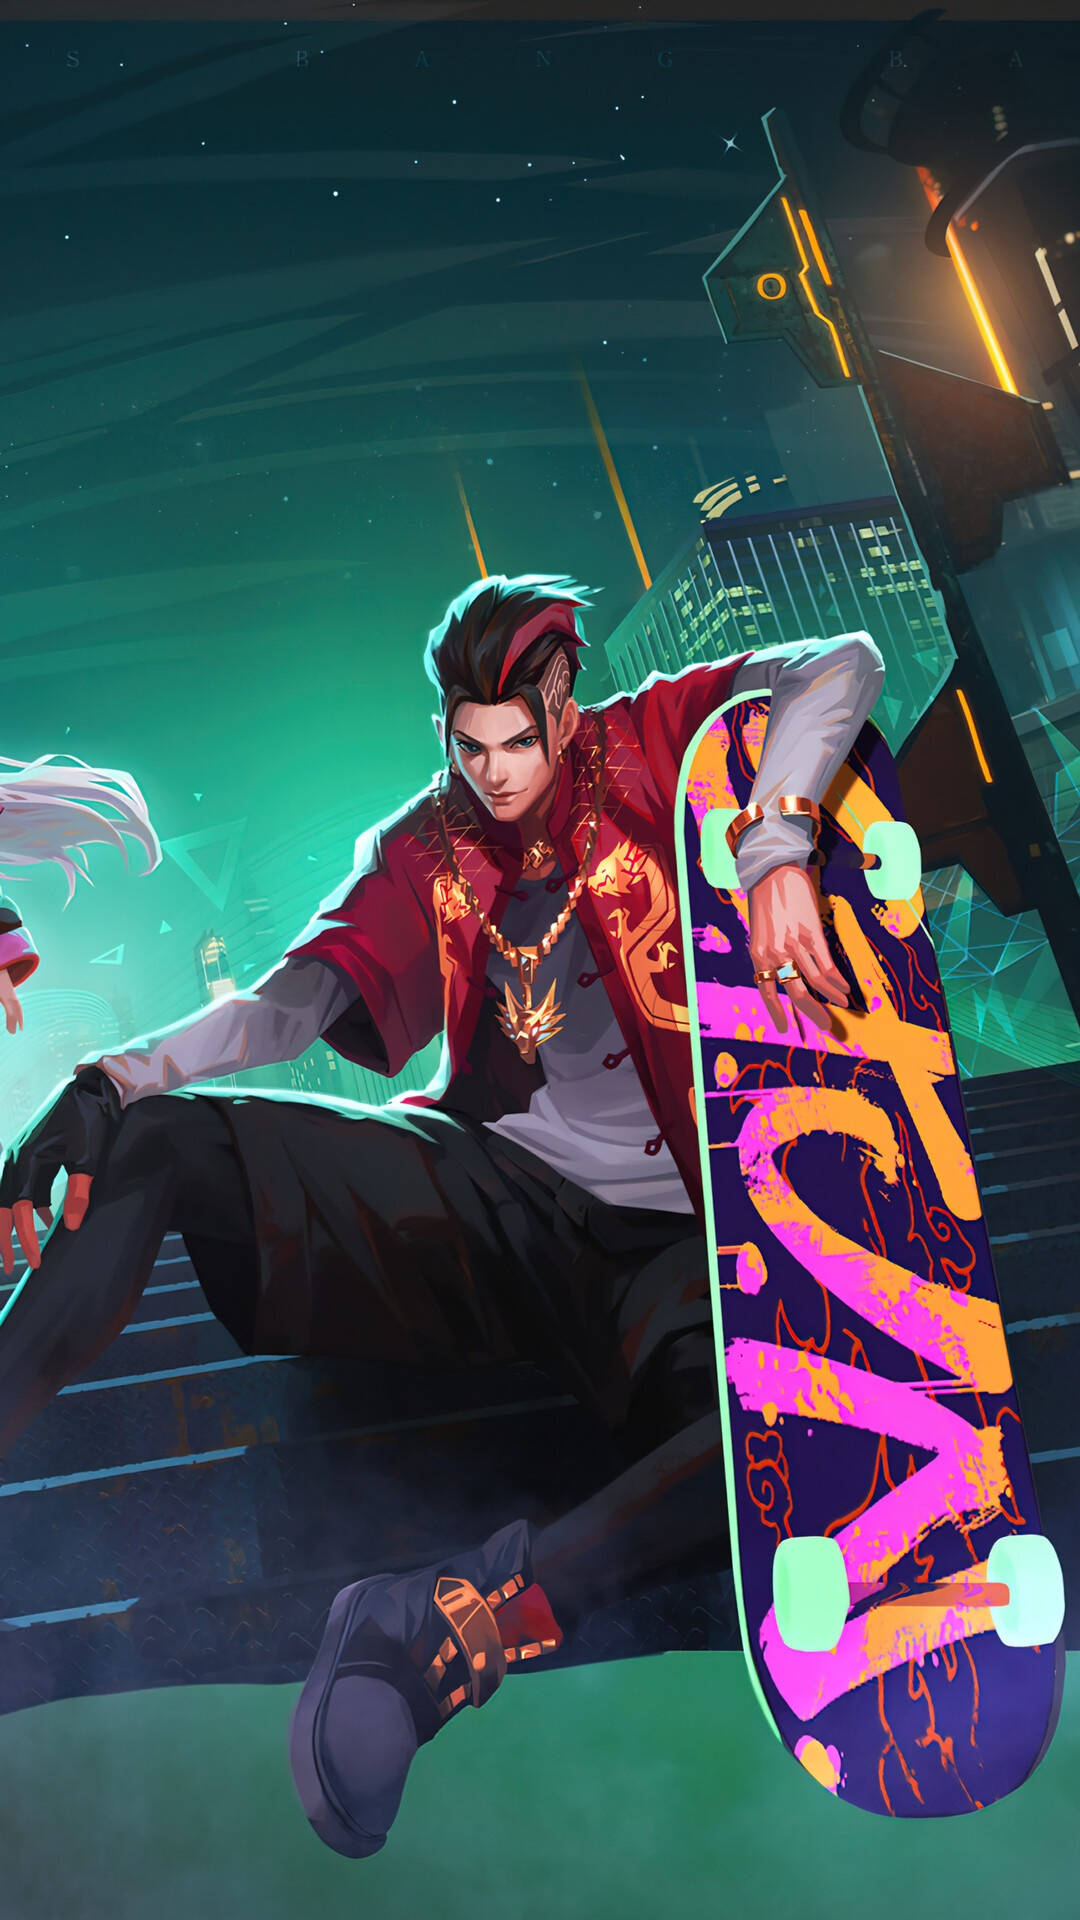 Stunning Wallpaper Featuring Chou From Mobile Legends With His Skateboard Background